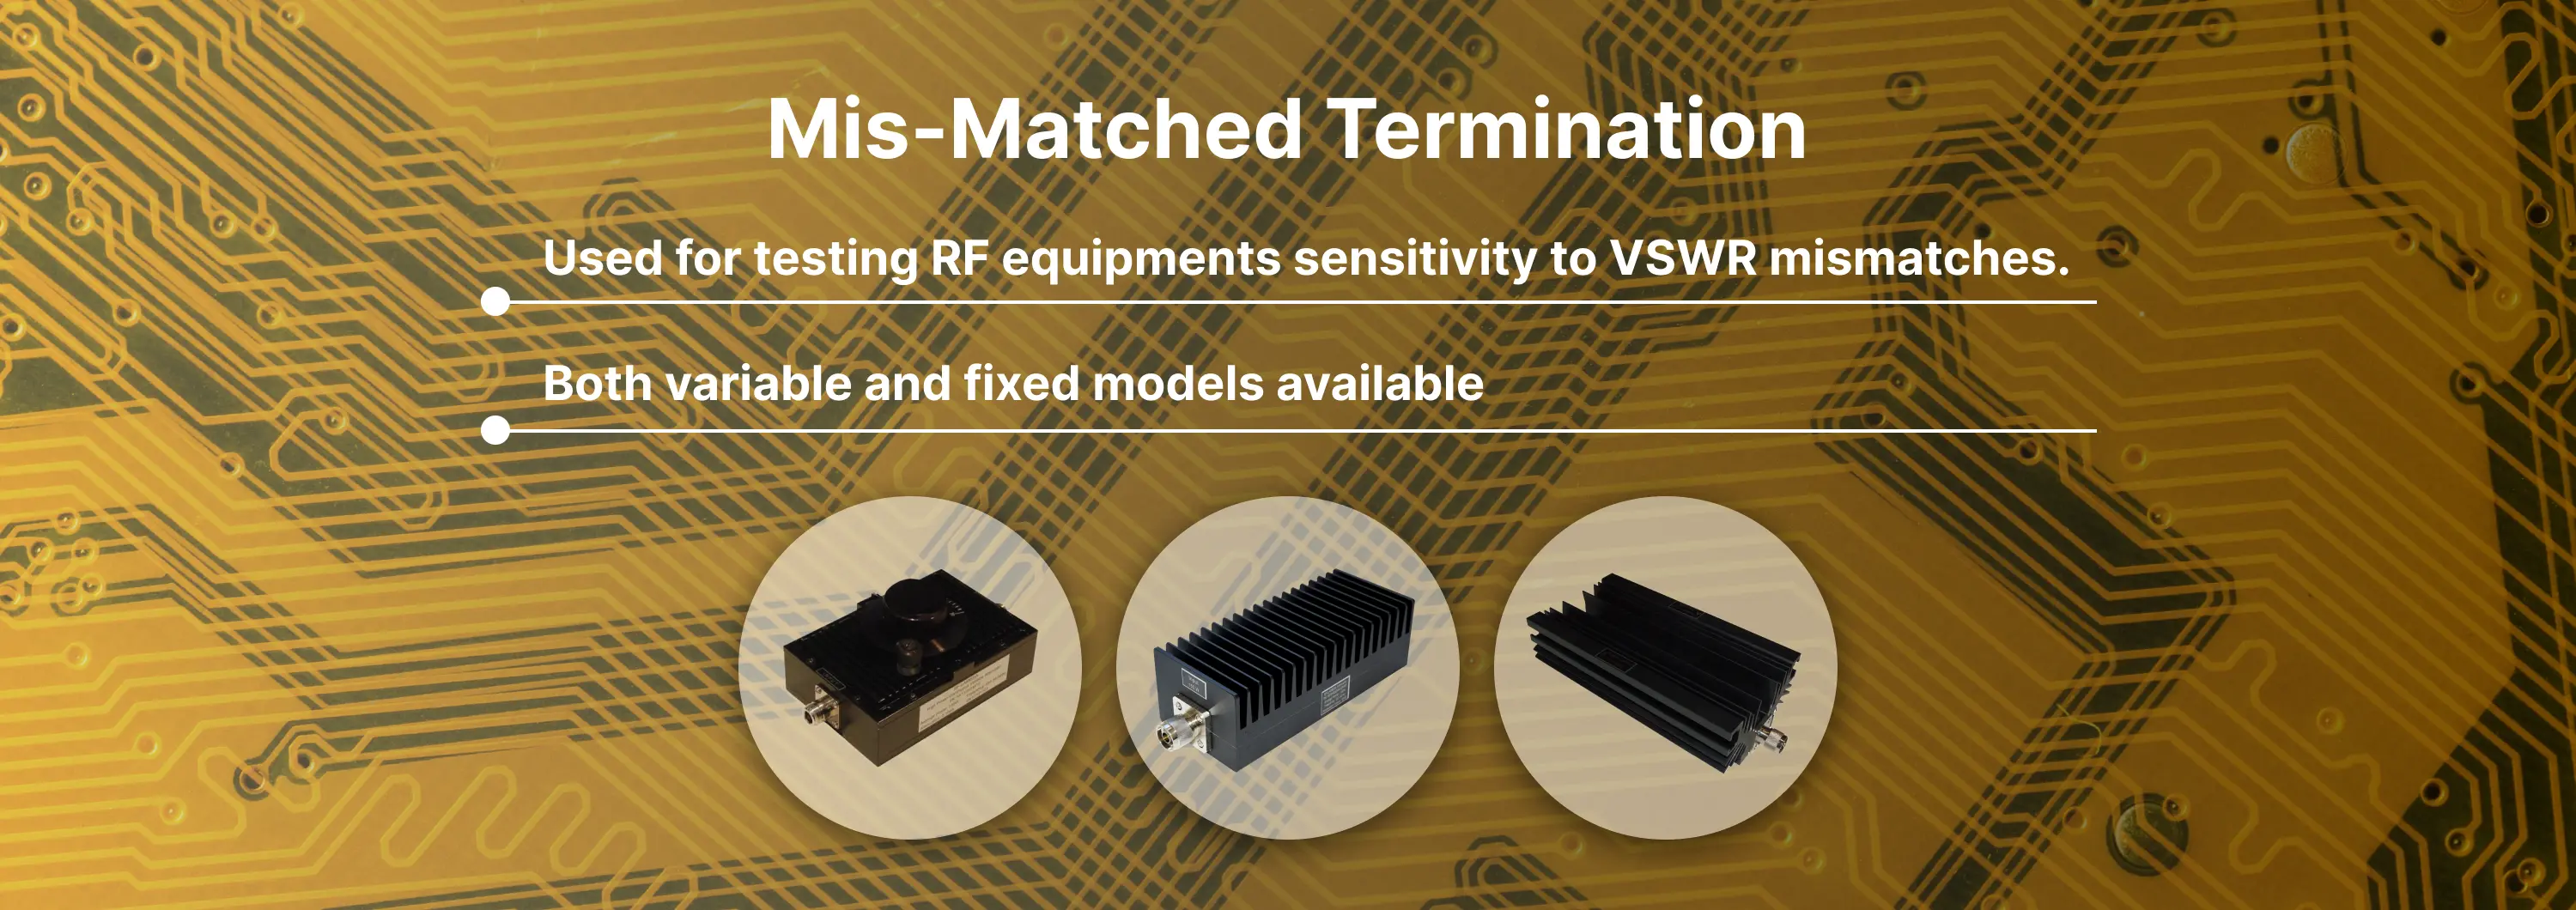 Mis-Matched Termination Banner